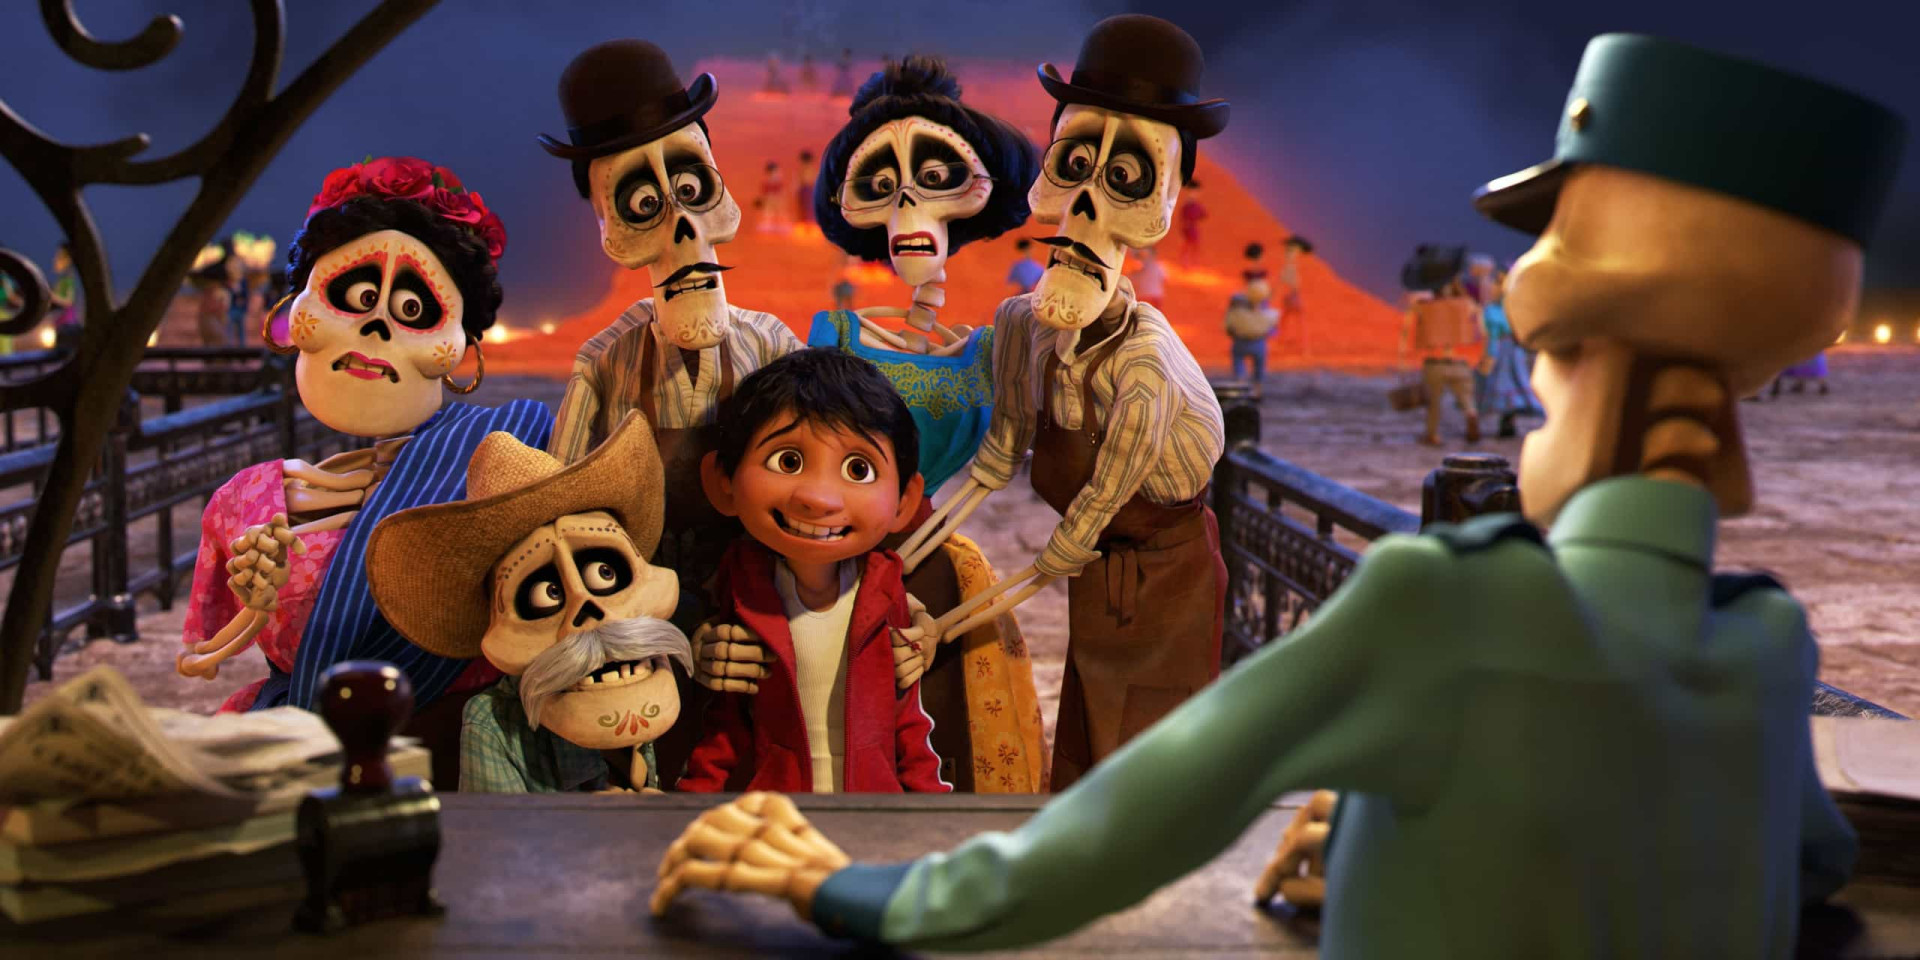 <p>This song from 'Coco' (2017) will make any sad kid smile—it really is that uplifting! In fact, here's a challenge for you: try to stand still while you listen to it. </p><p><a href="https://www.msn.com/en-us/community/channel/vid-7xx8mnucu55yw63we9va2gwr7uihbxwc68fxqp25x6tg4ftibpra?cvid=94631541bc0f4f89bfd59158d696ad7e">Follow us and access great exclusive content every day</a></p>